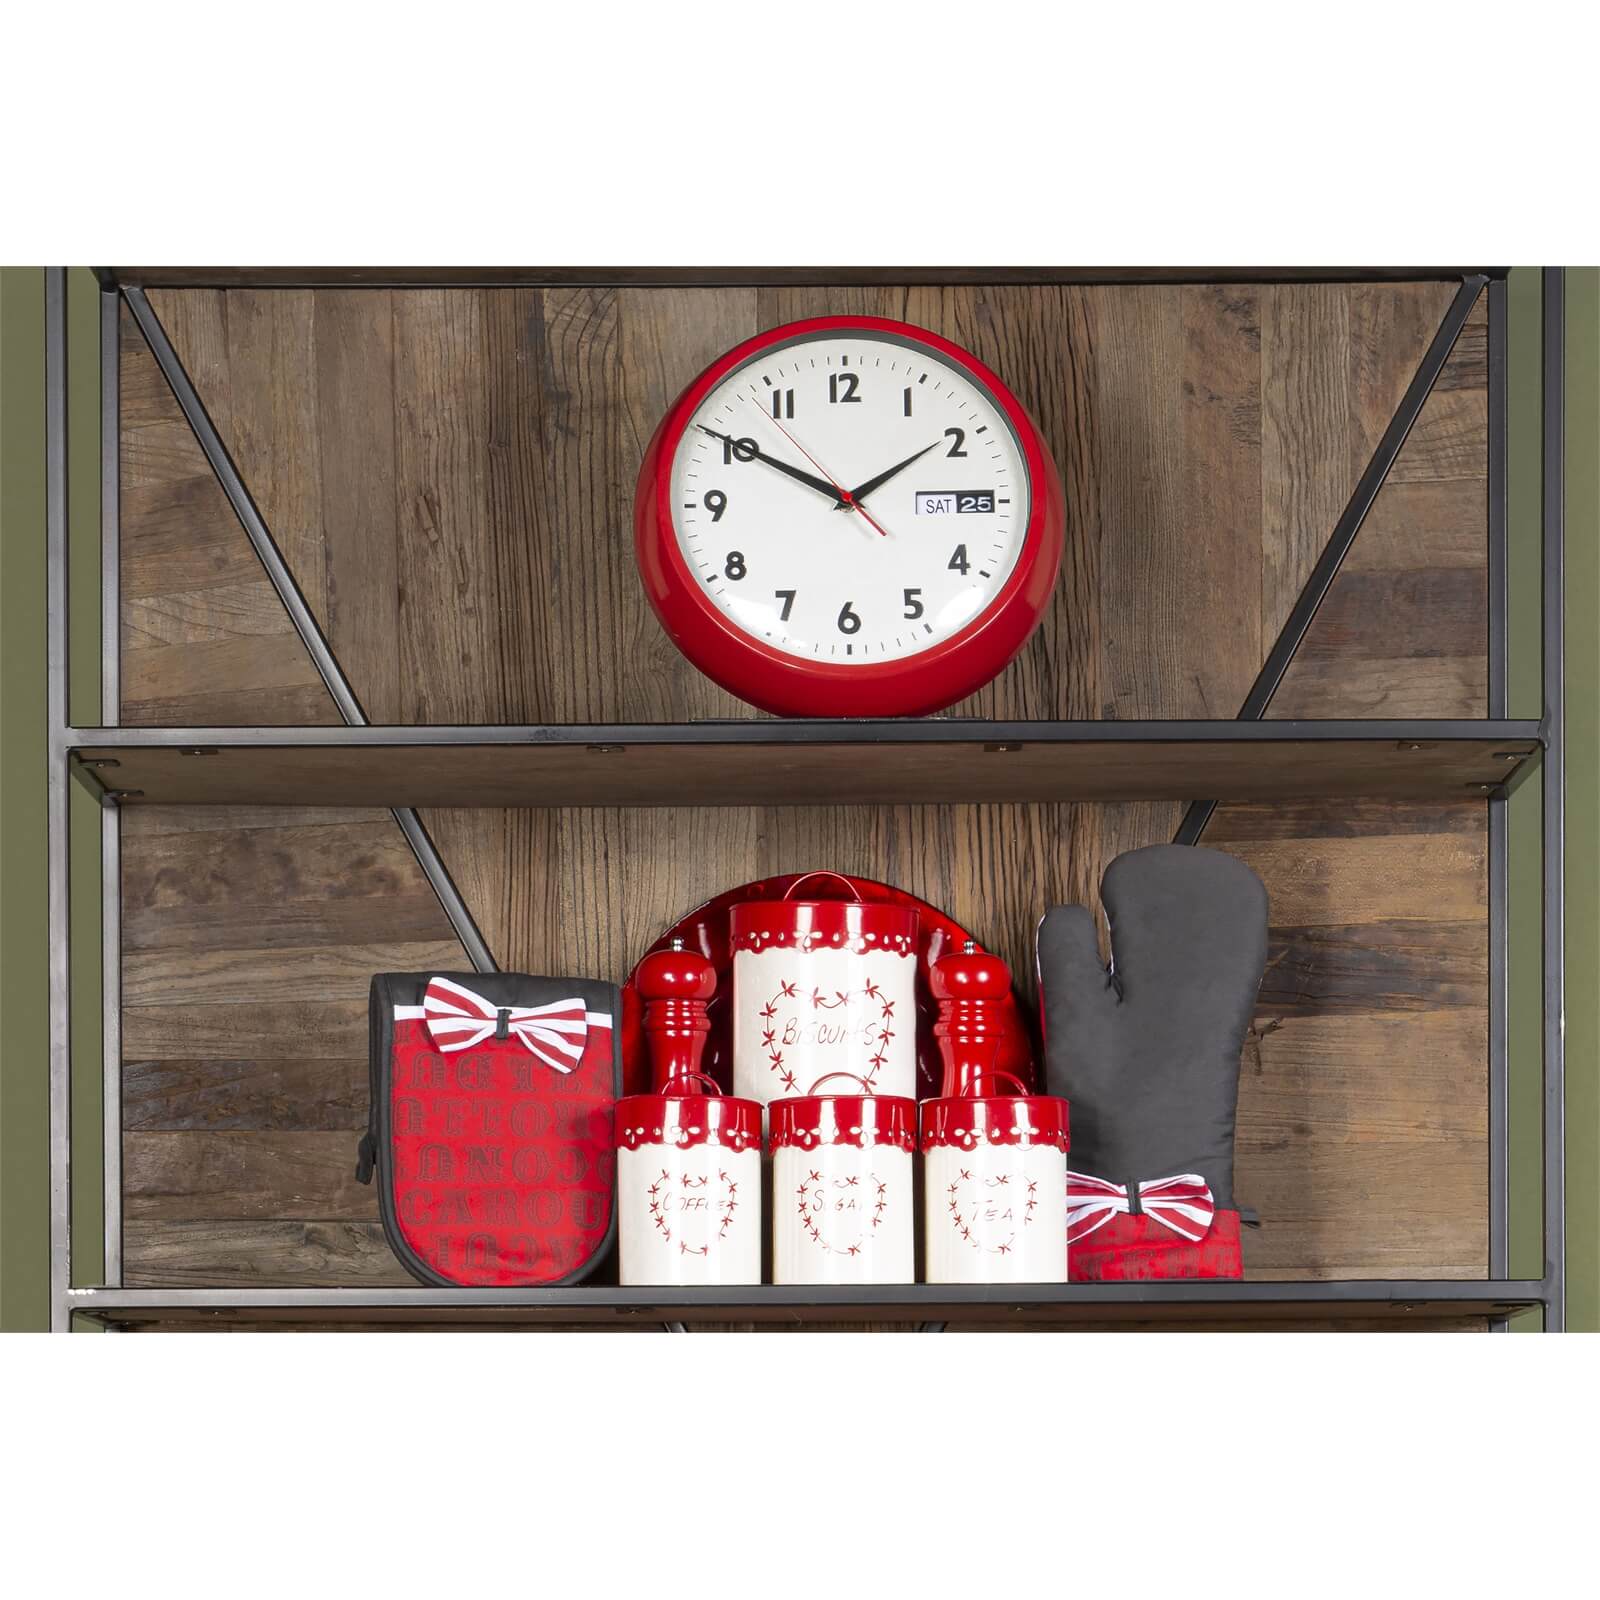 Day & Date Wall Clock - Red